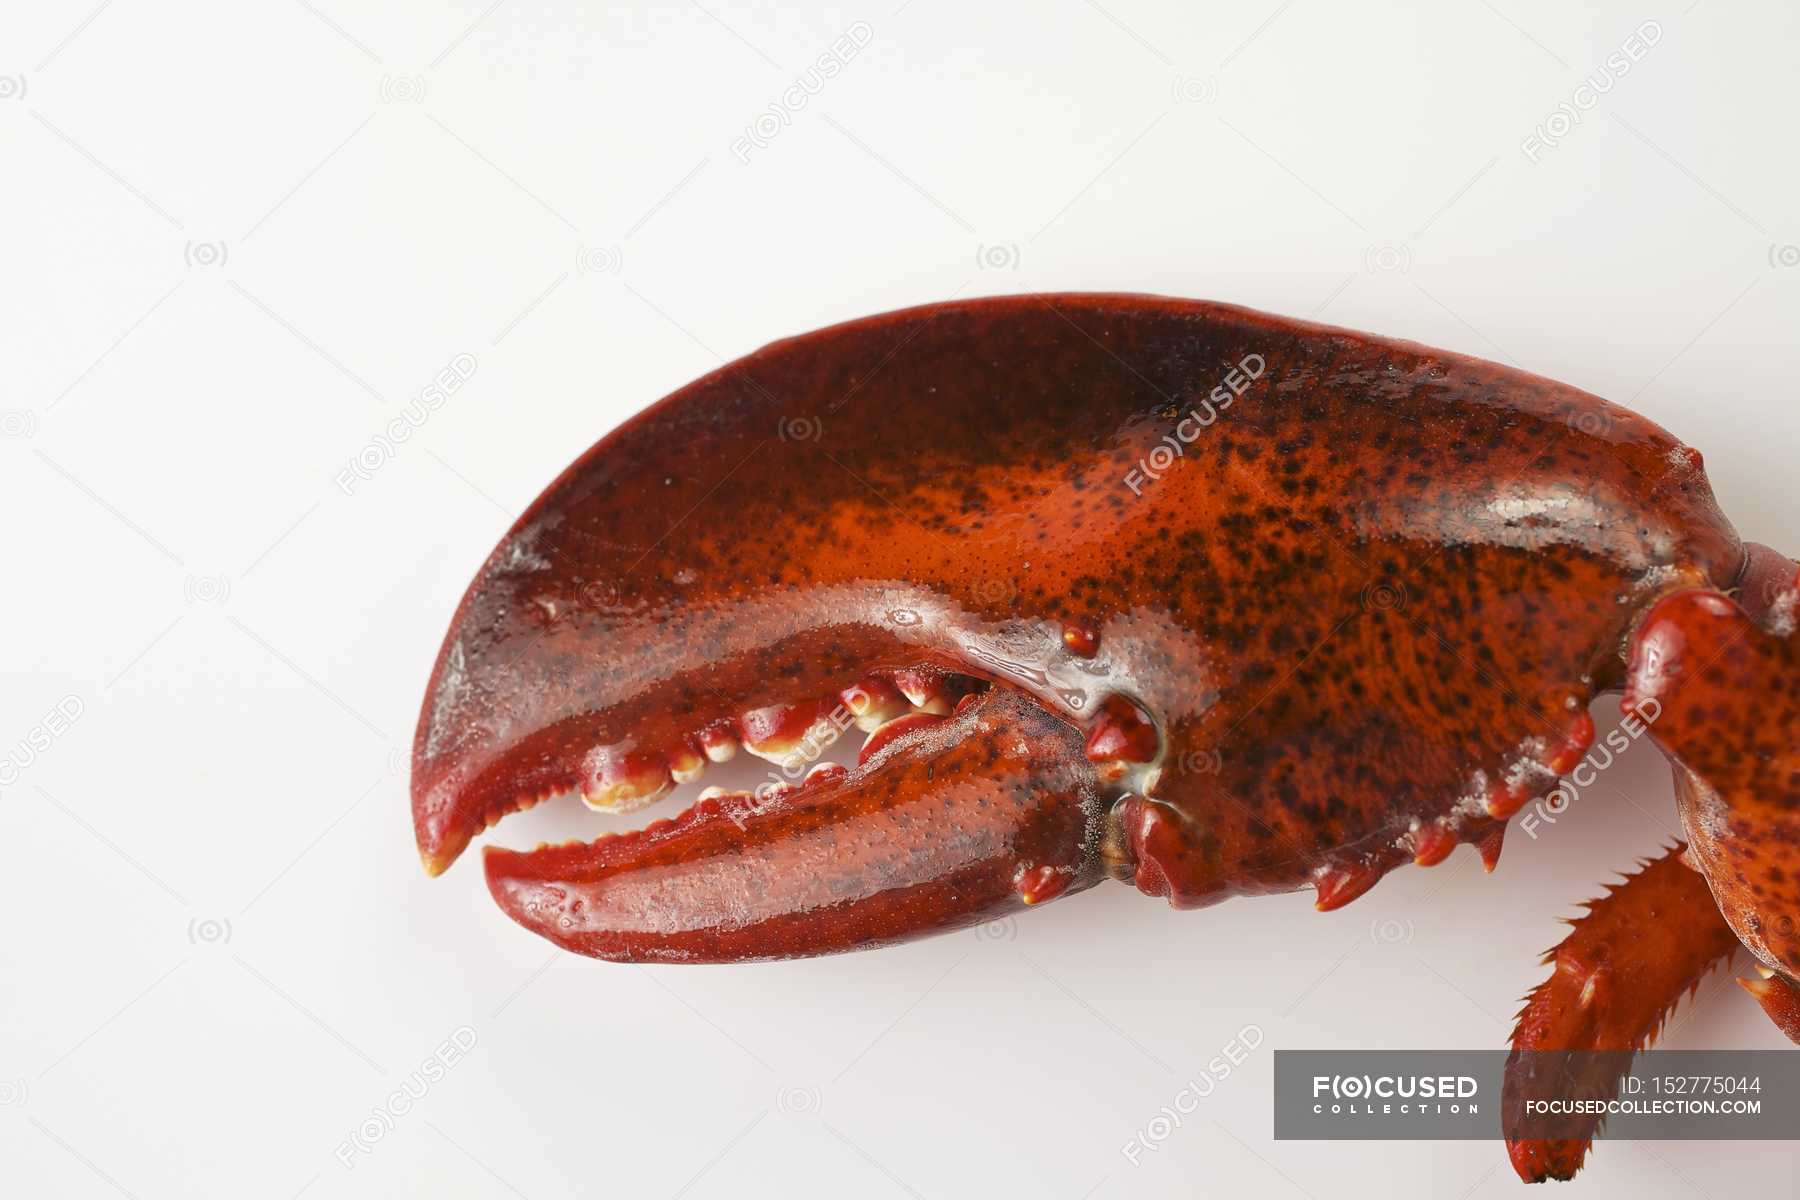 Closeup View Of Lobster Claw On White Surface Red Close Up Stock Photo 152775044